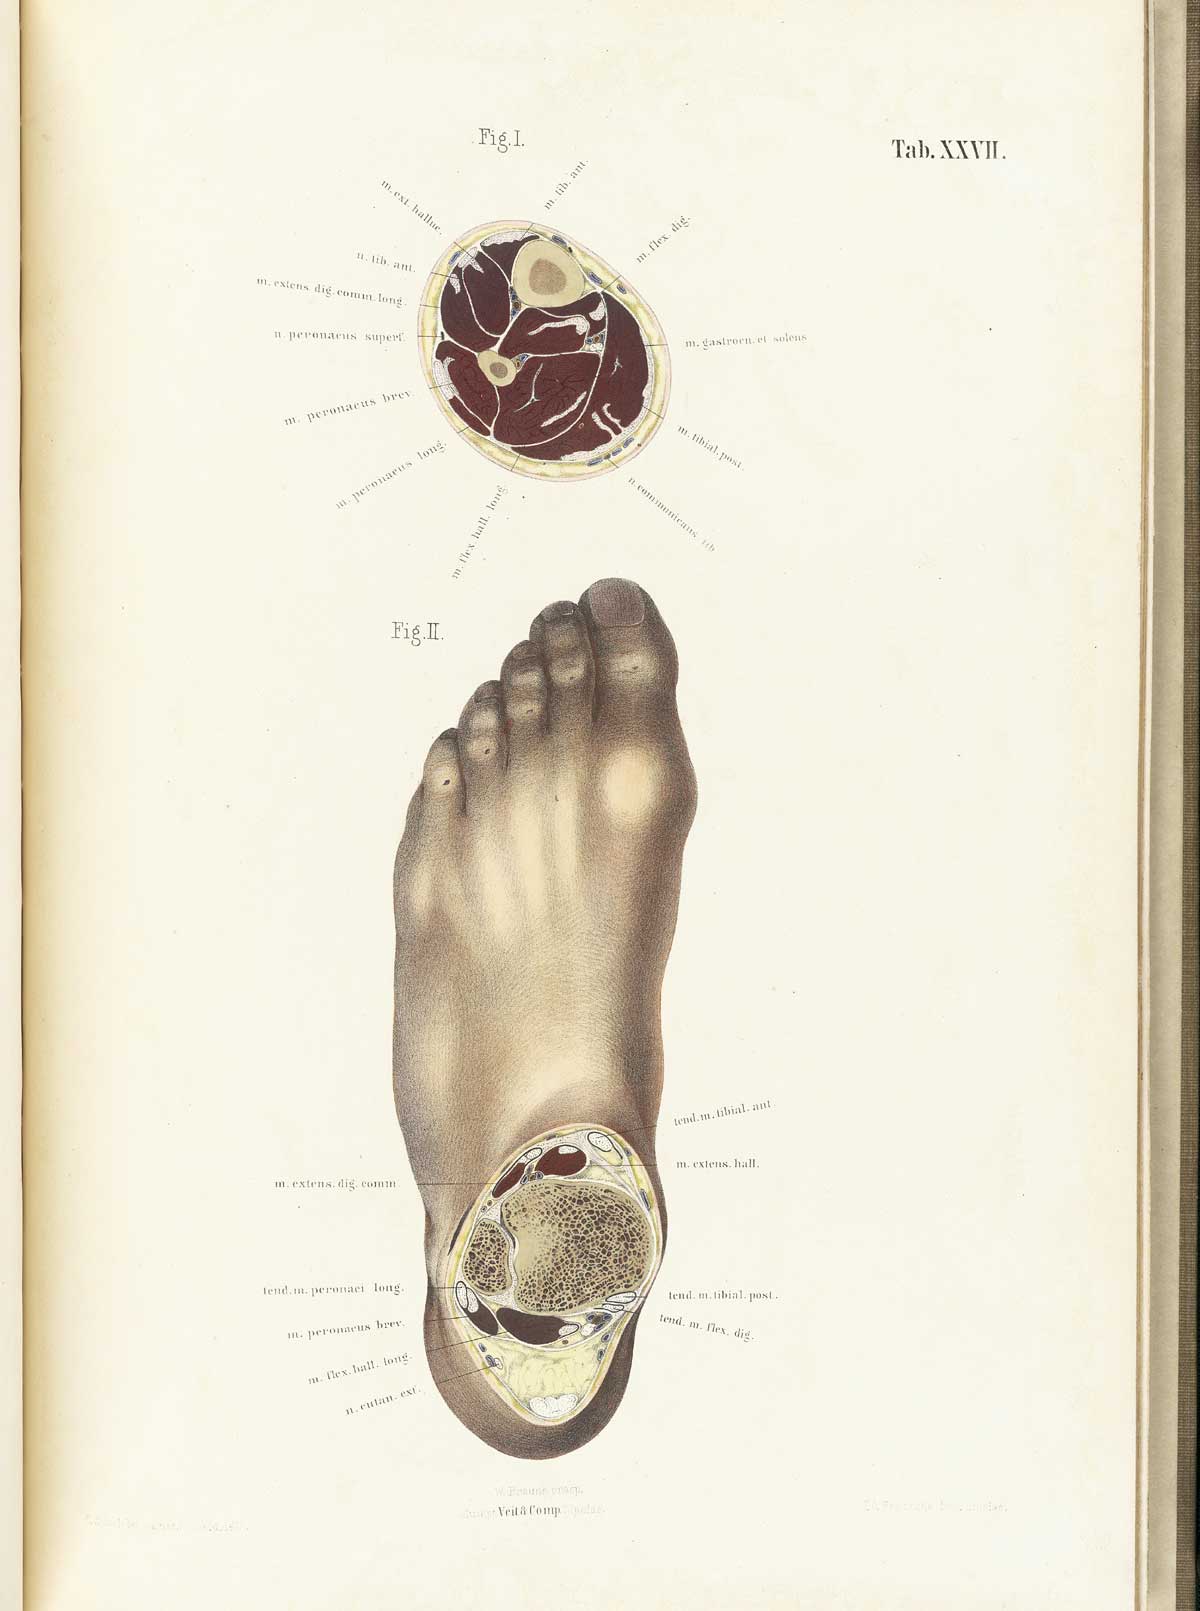 Chromolithograph cross-sections of the foot (sliced at the ankle) and the lower shin, showing the muscles, bones, and other structures, from Wilhelm Braune’s Topographisch-anatomischer Atlas. Leipzig, 1867.